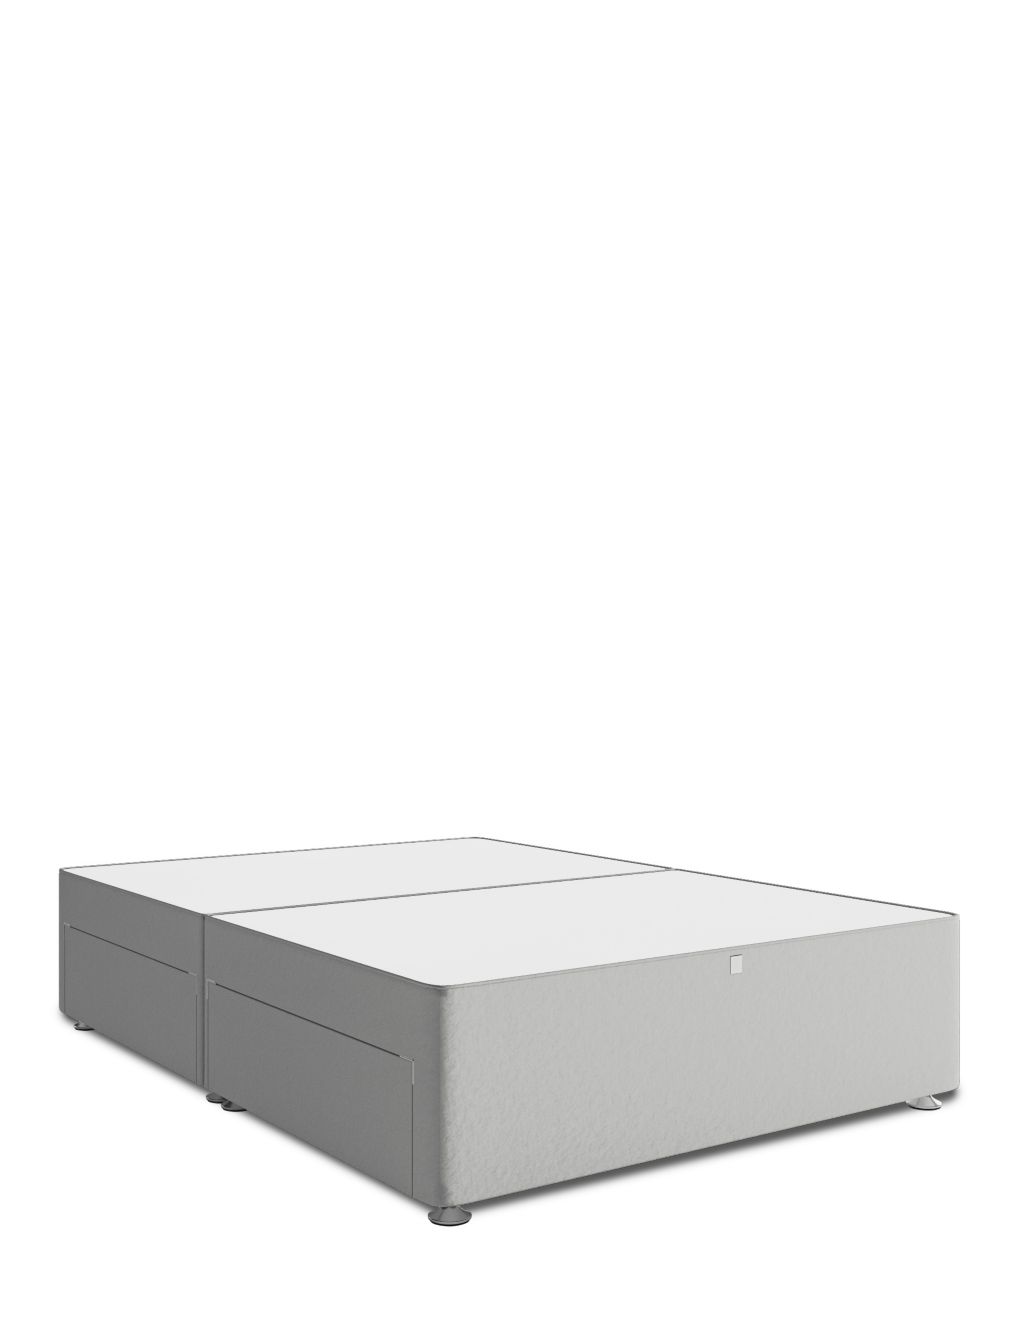 Classic Firm 2+2 Drawer Divan image 2